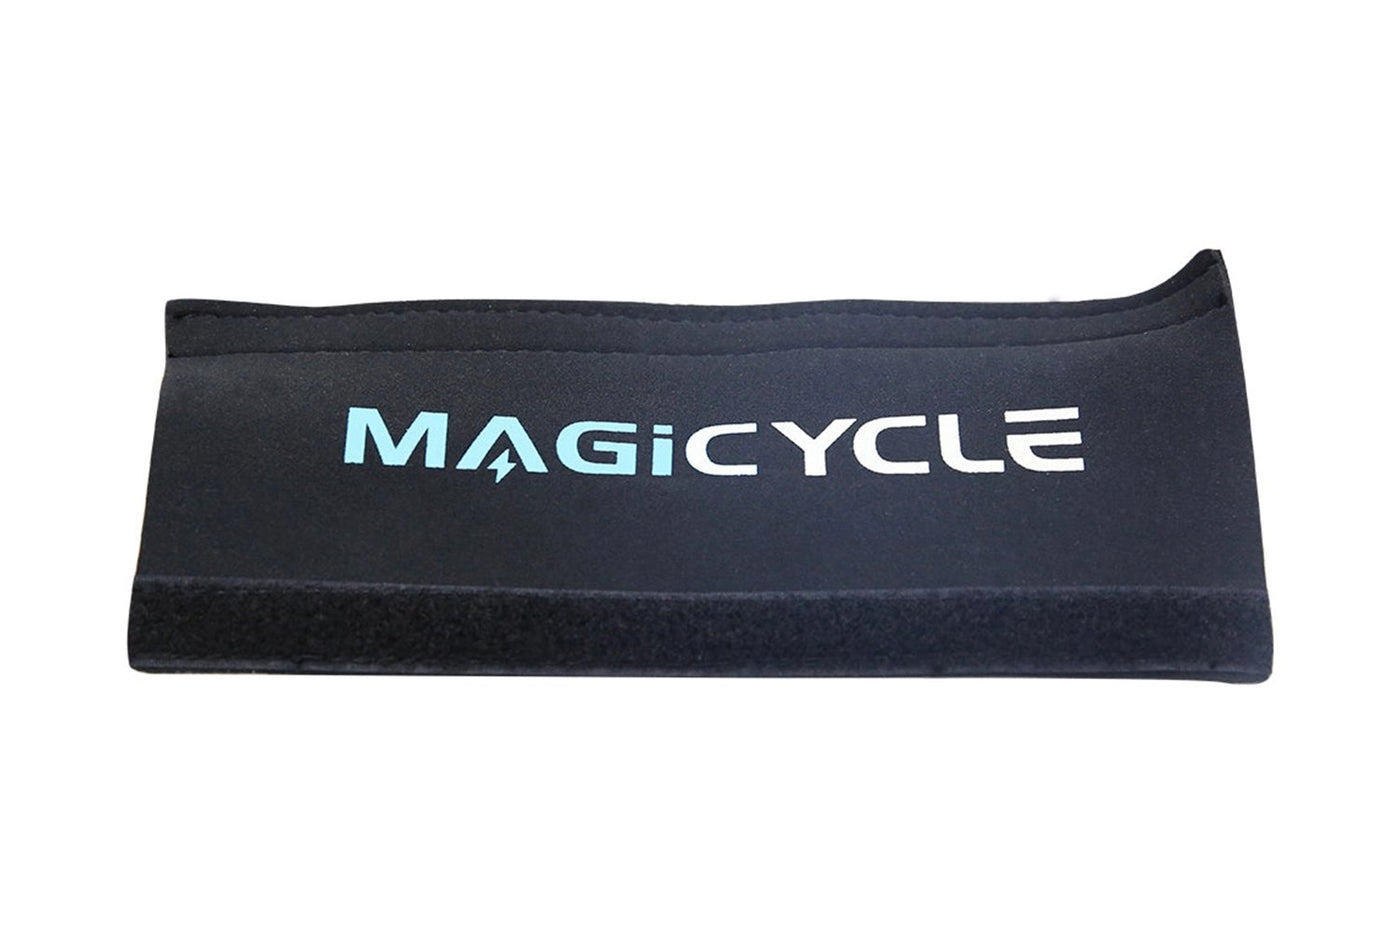 Magicycle Ebike Chainstay Protector